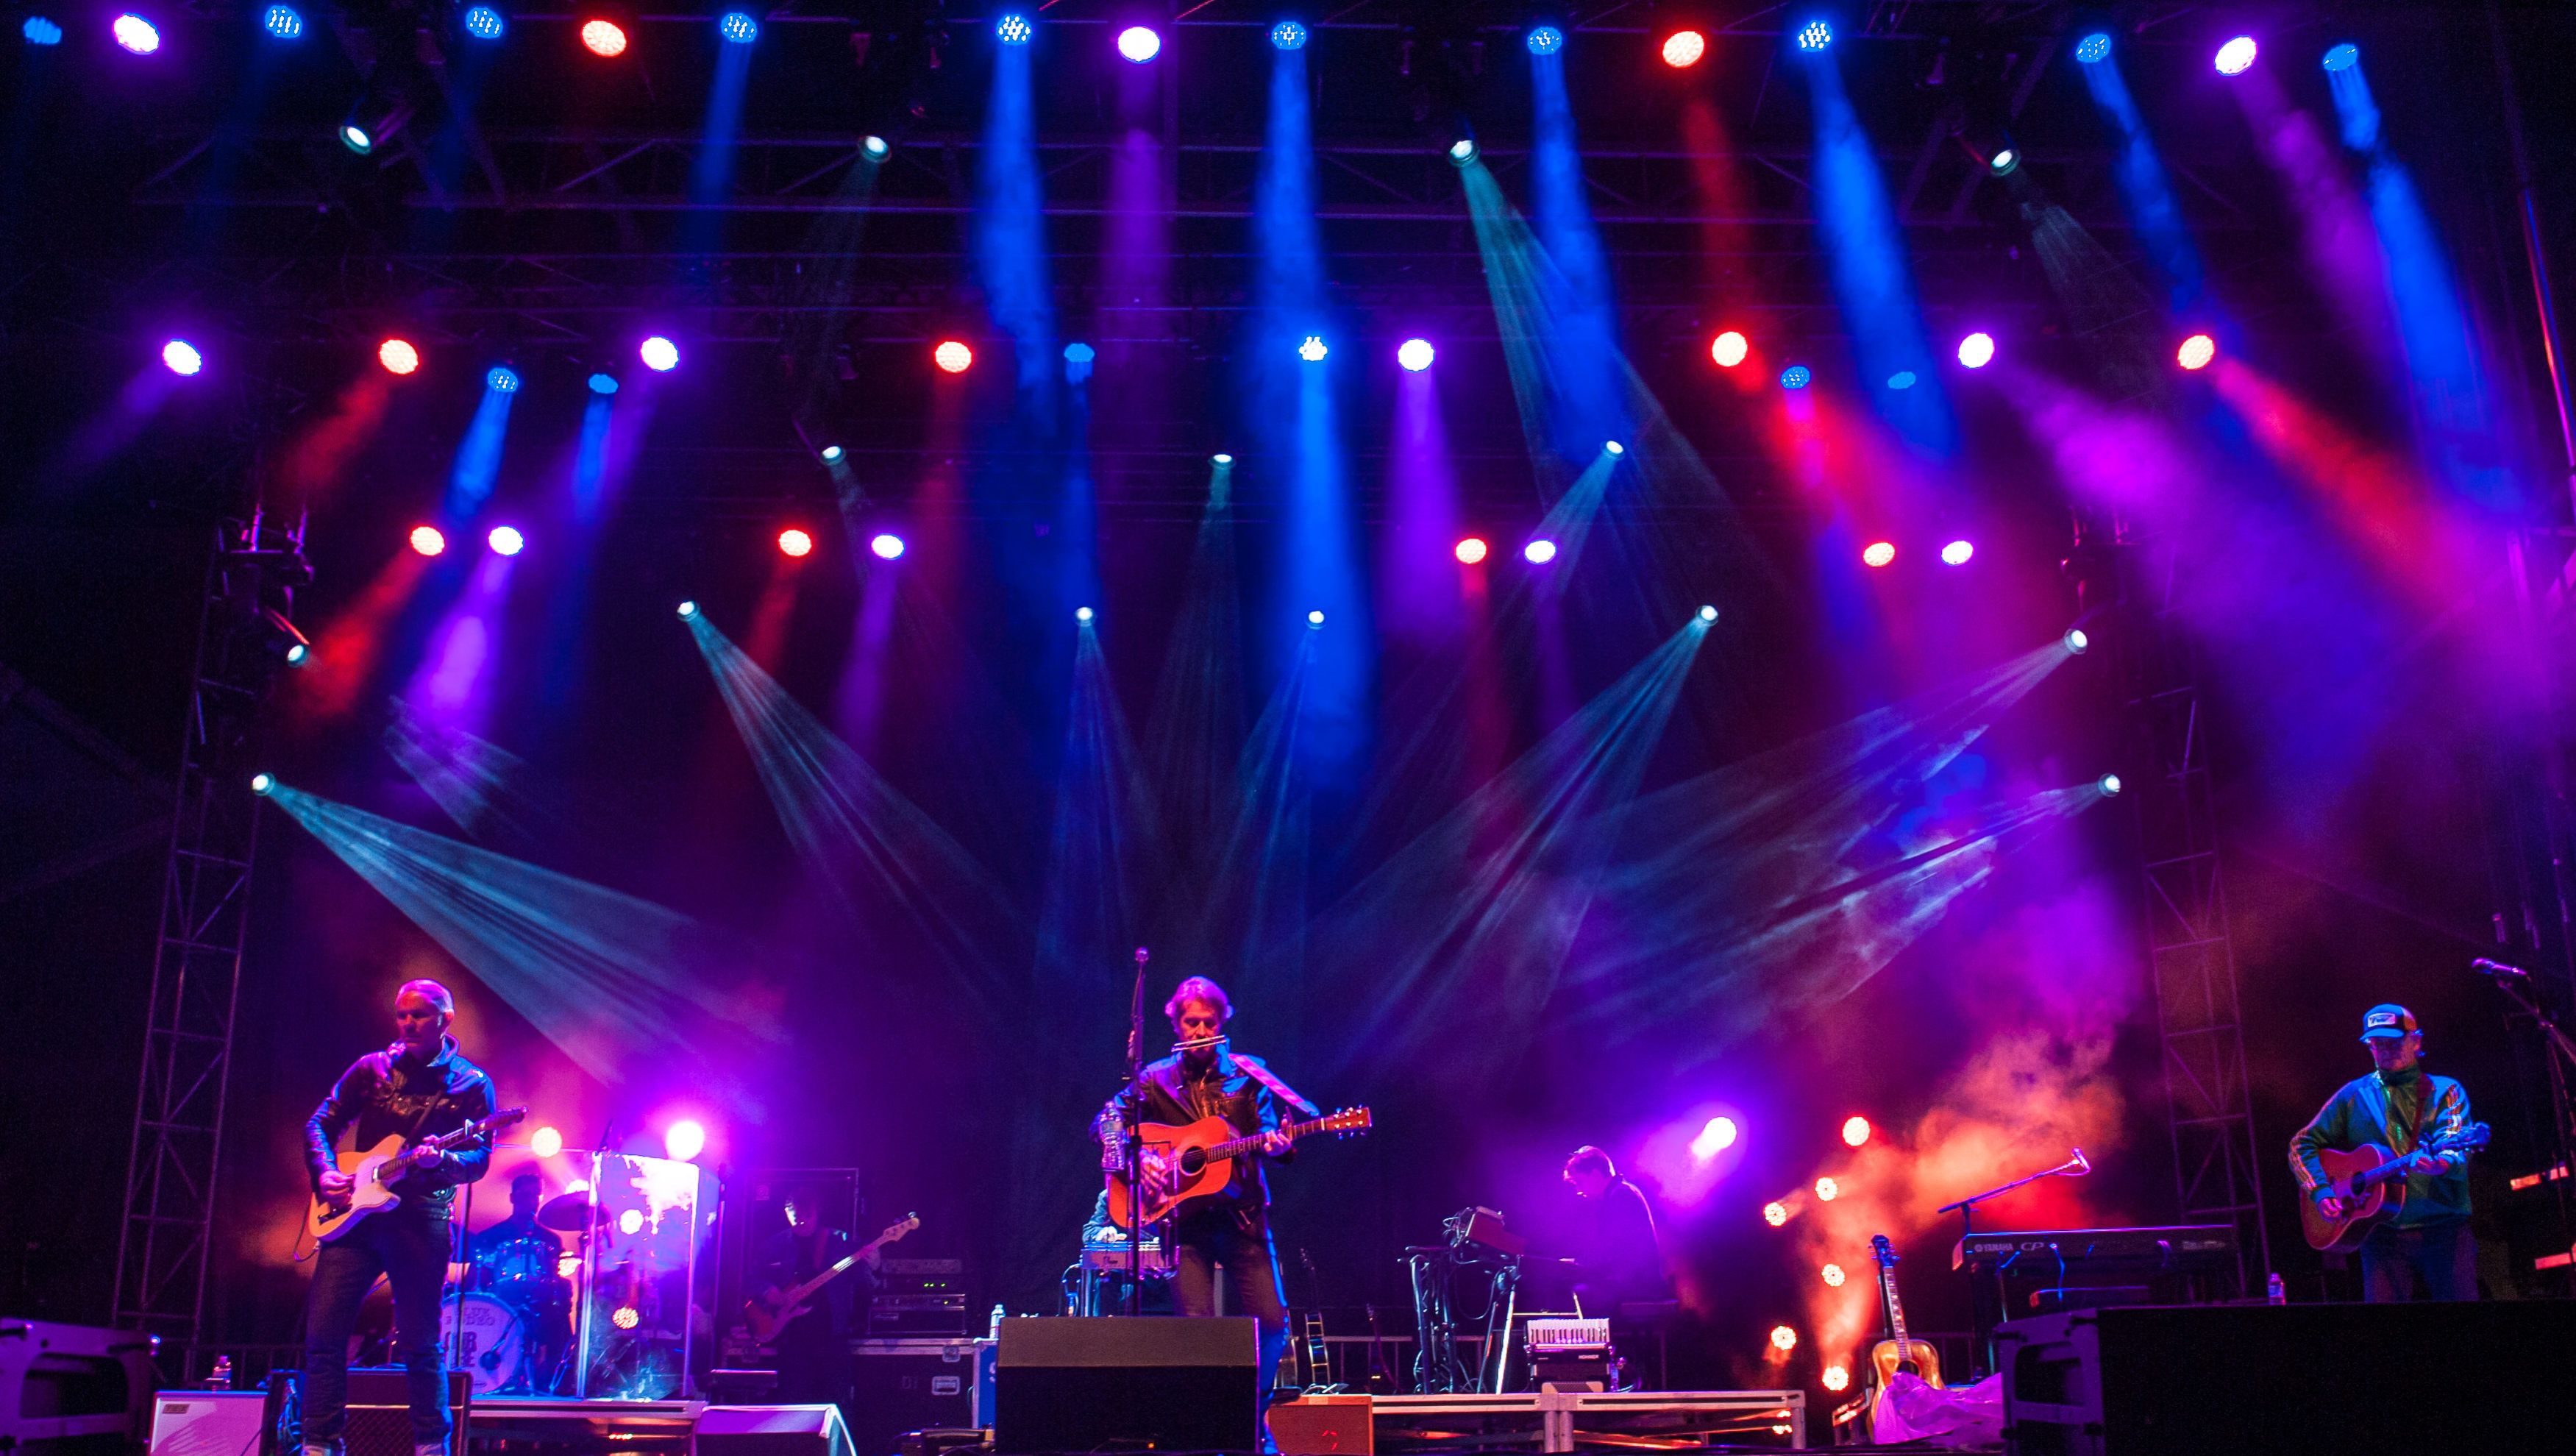 Blue Rodeo performs at the Ottawa Folk Festival on  Saturday, Sept 13th, 2014. The Ottawa Folk Festival is one of the most popular music events in Canada’s capital. Ottawa Folk Festival Press Images Photo: Marc DesRosiers